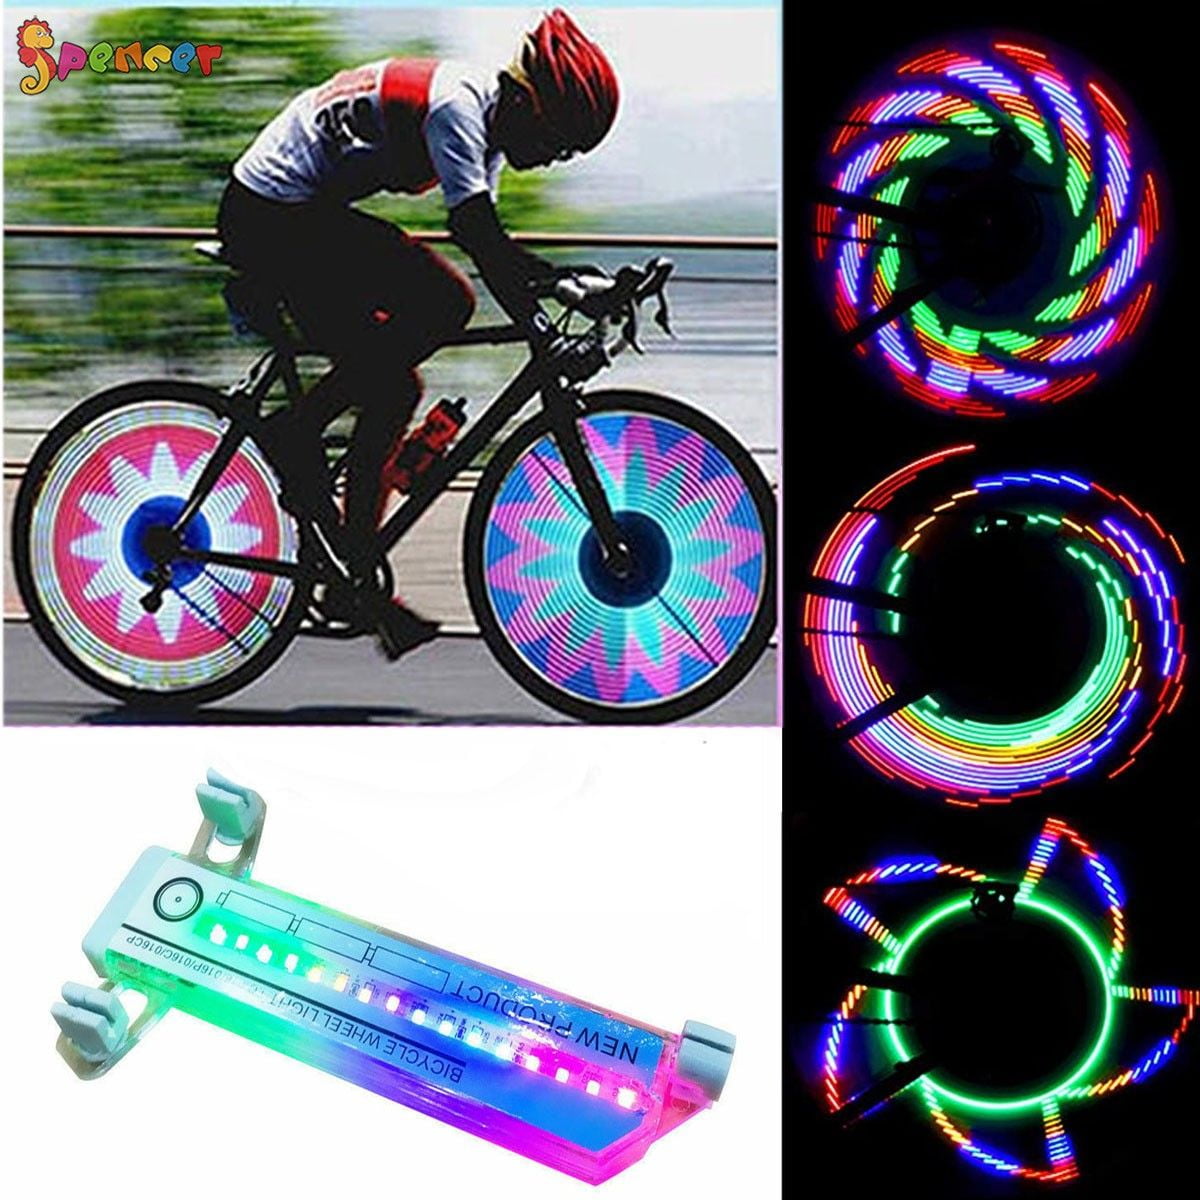 Details about   32 LED Colorful Bicycle Cycling Wheel Bike Signal Tire Spoke Light 32 Changes 